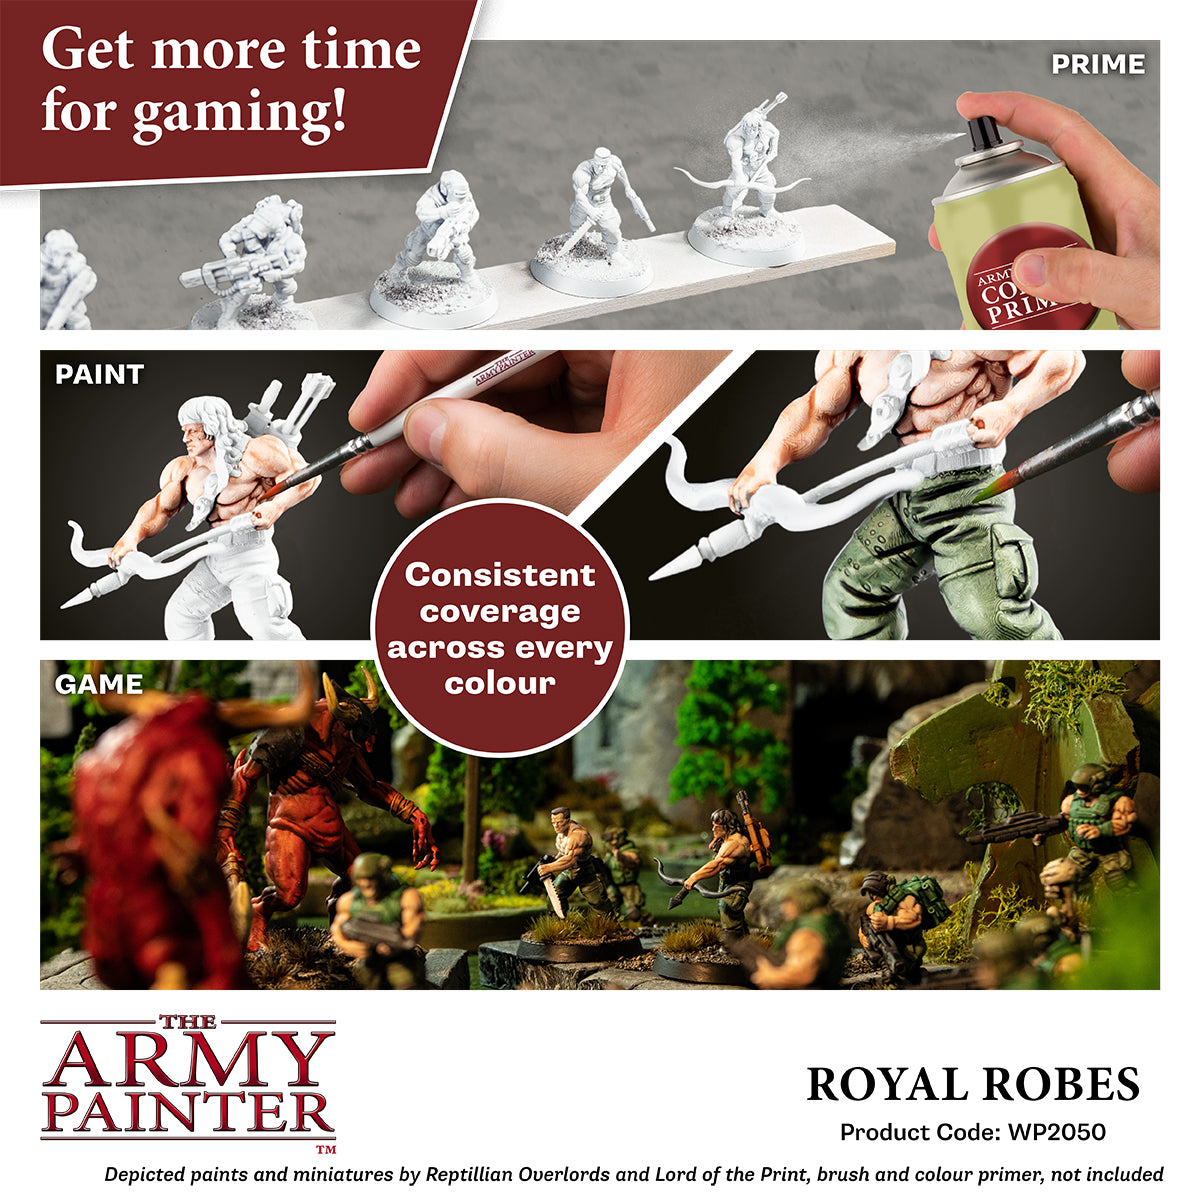 Army Painter: Speedpaint 2.0 - Royal Robes